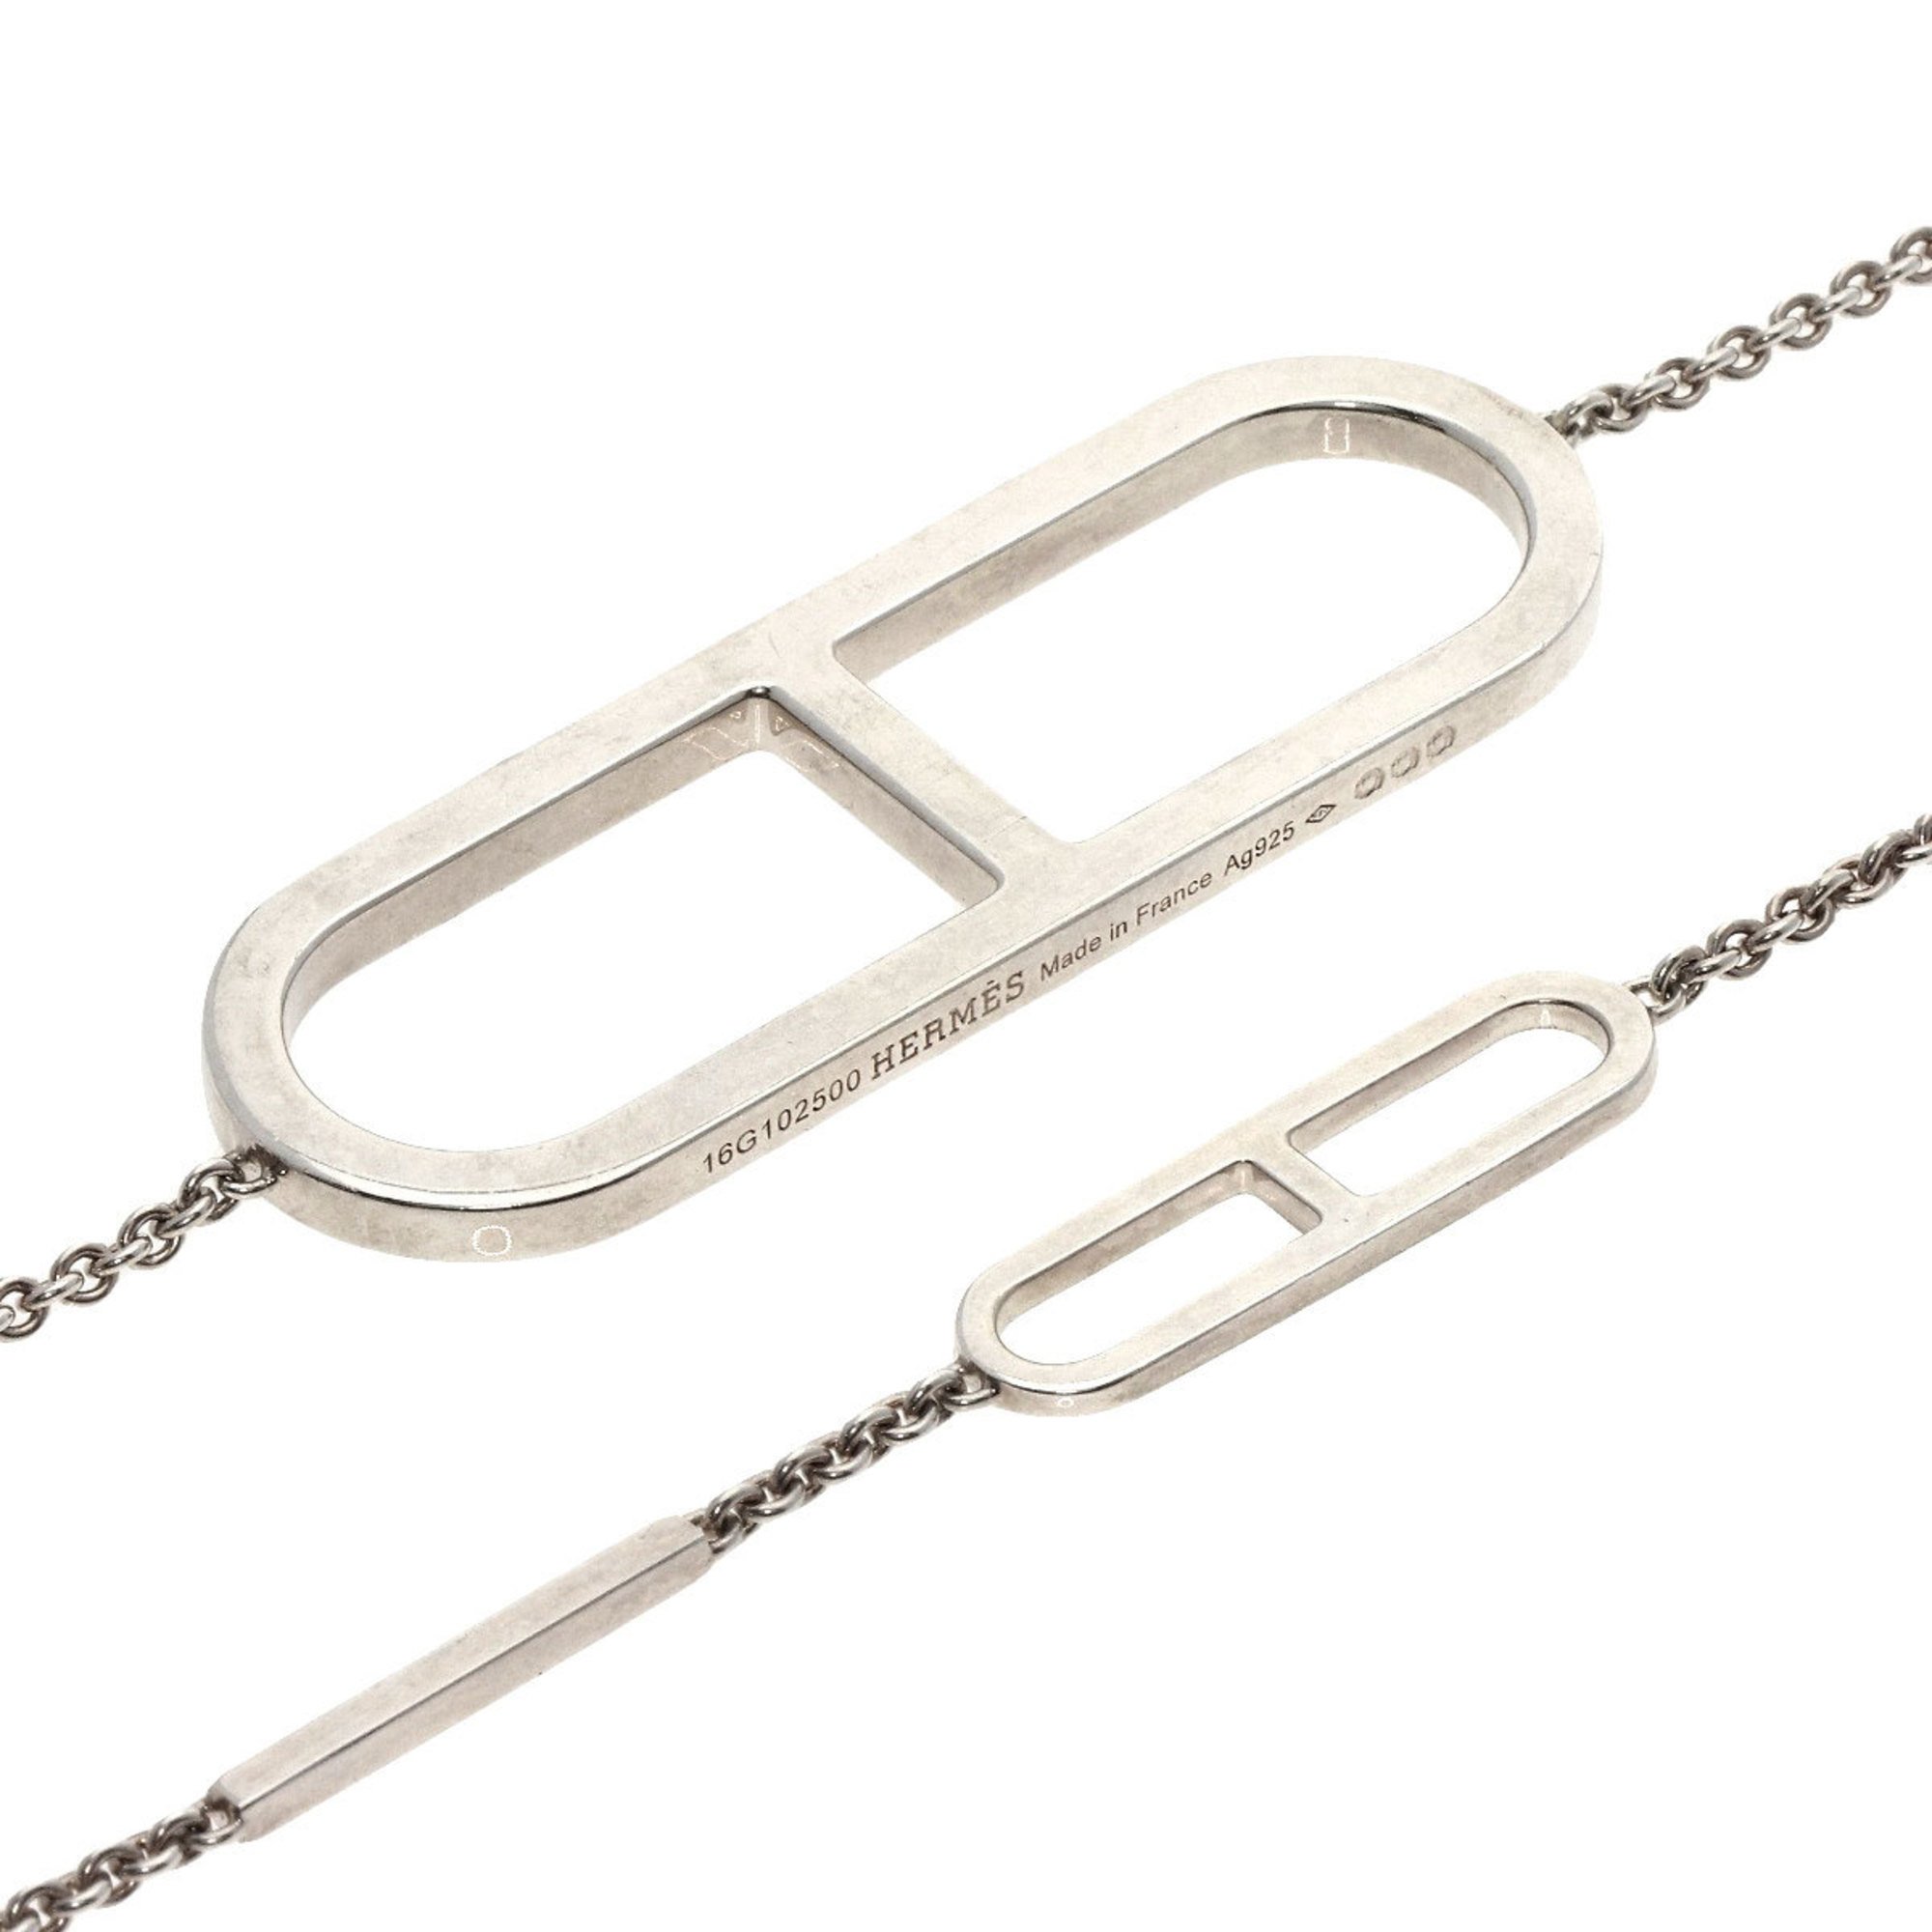 Hermes Chaine d'Ancre Necklace Silver Women's